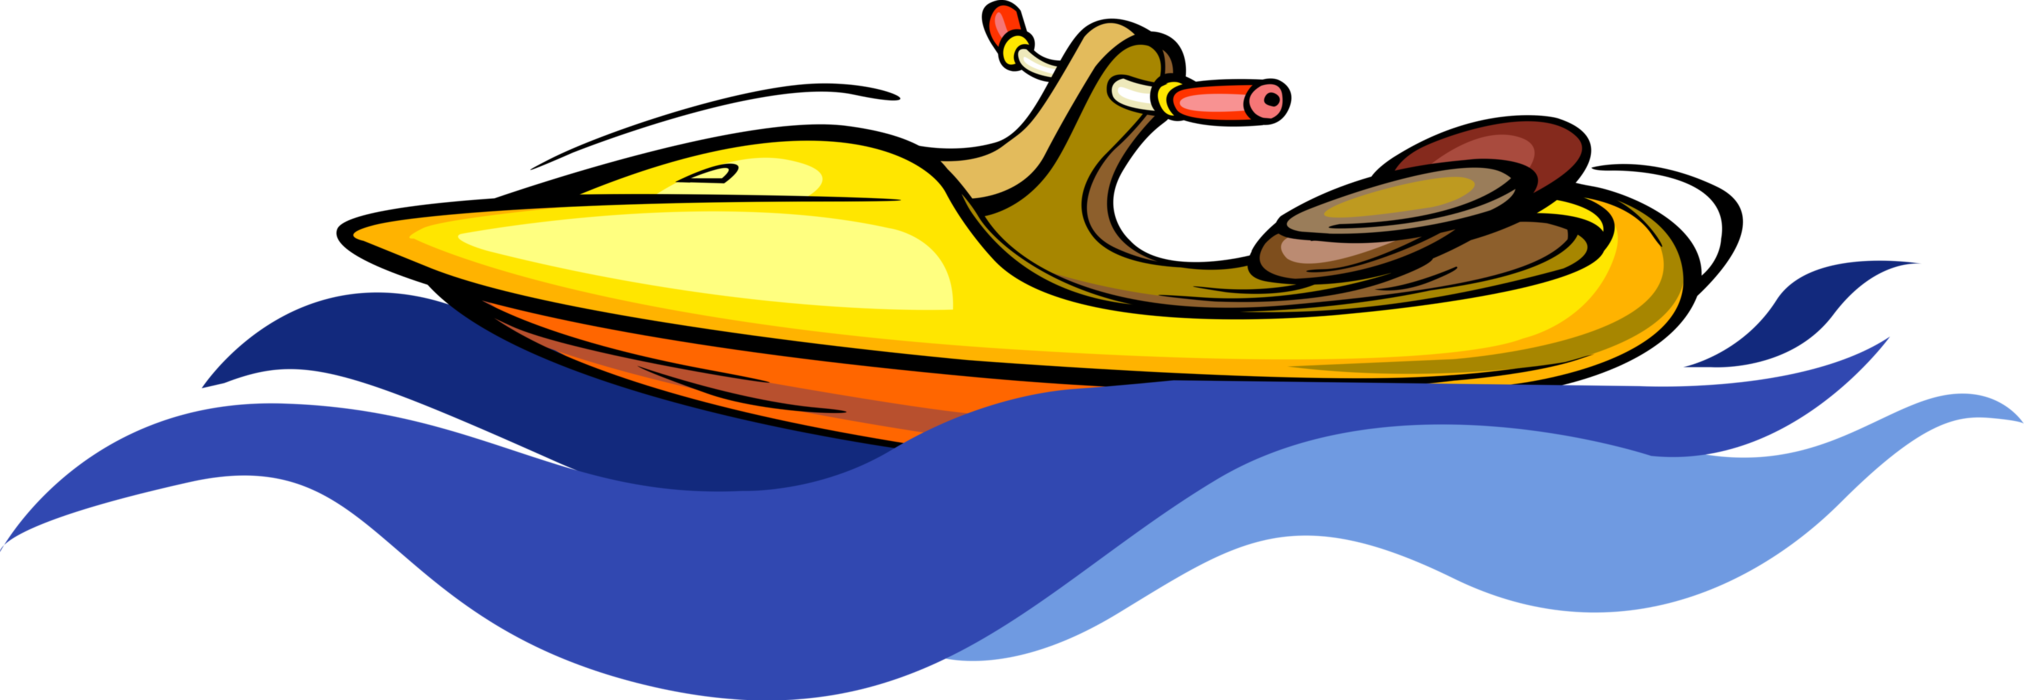 Skiing clipart board. Jet ski png images